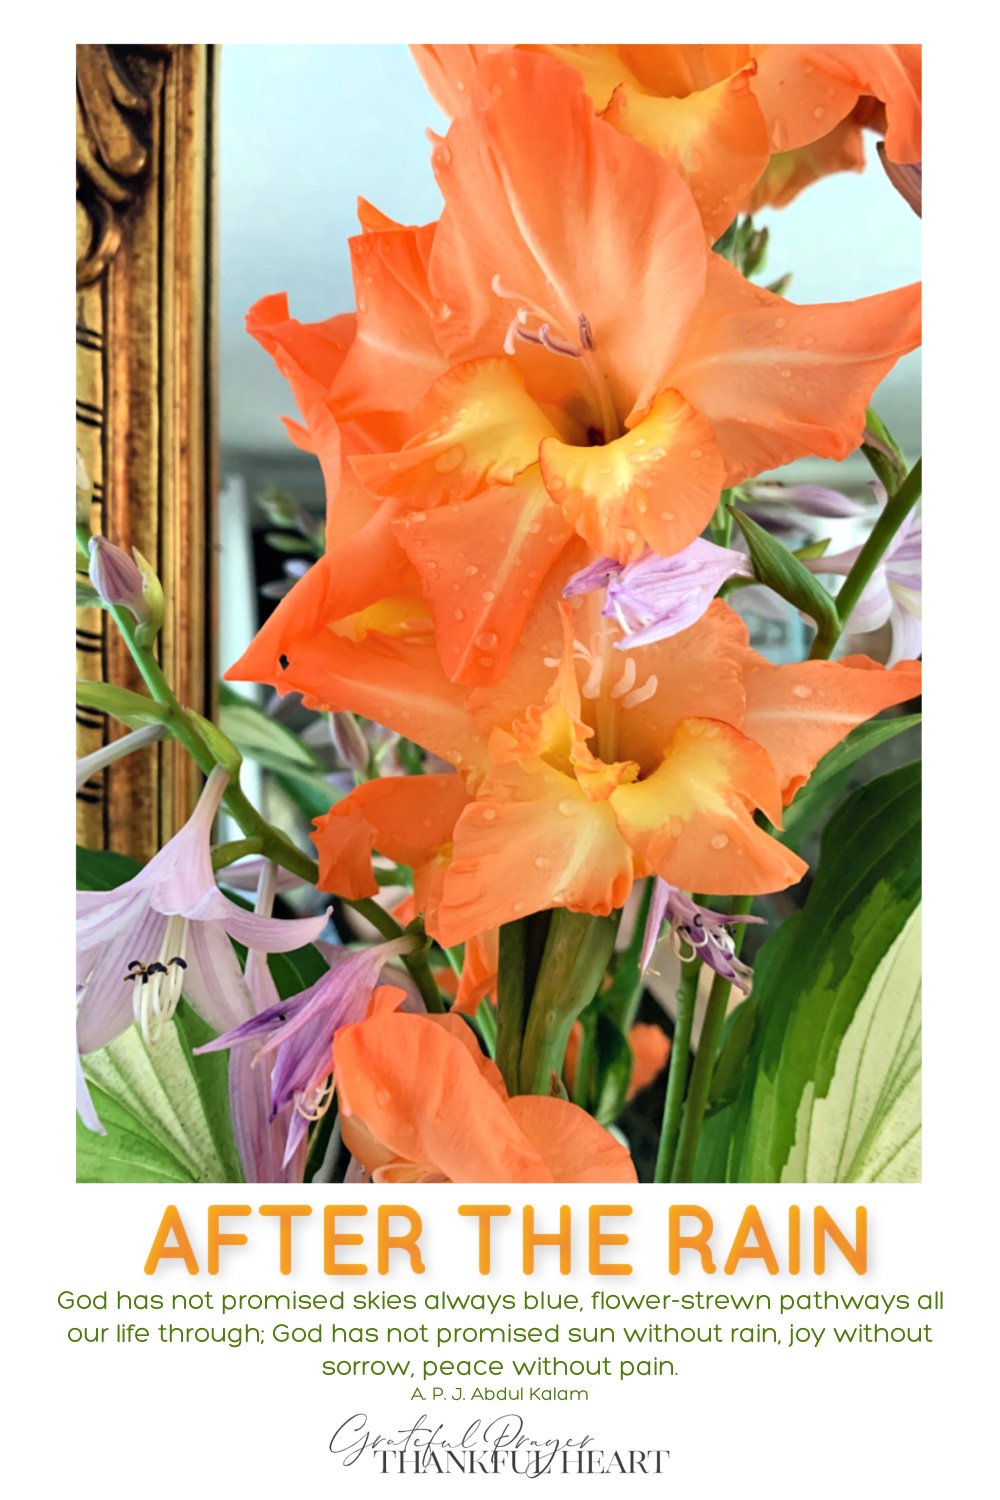 Summertime thunderstorms come with heavy rain and harsh wind, breaking the stems of flowers in the garden. Use them to create simple arrangements to brighten your home and attitude.